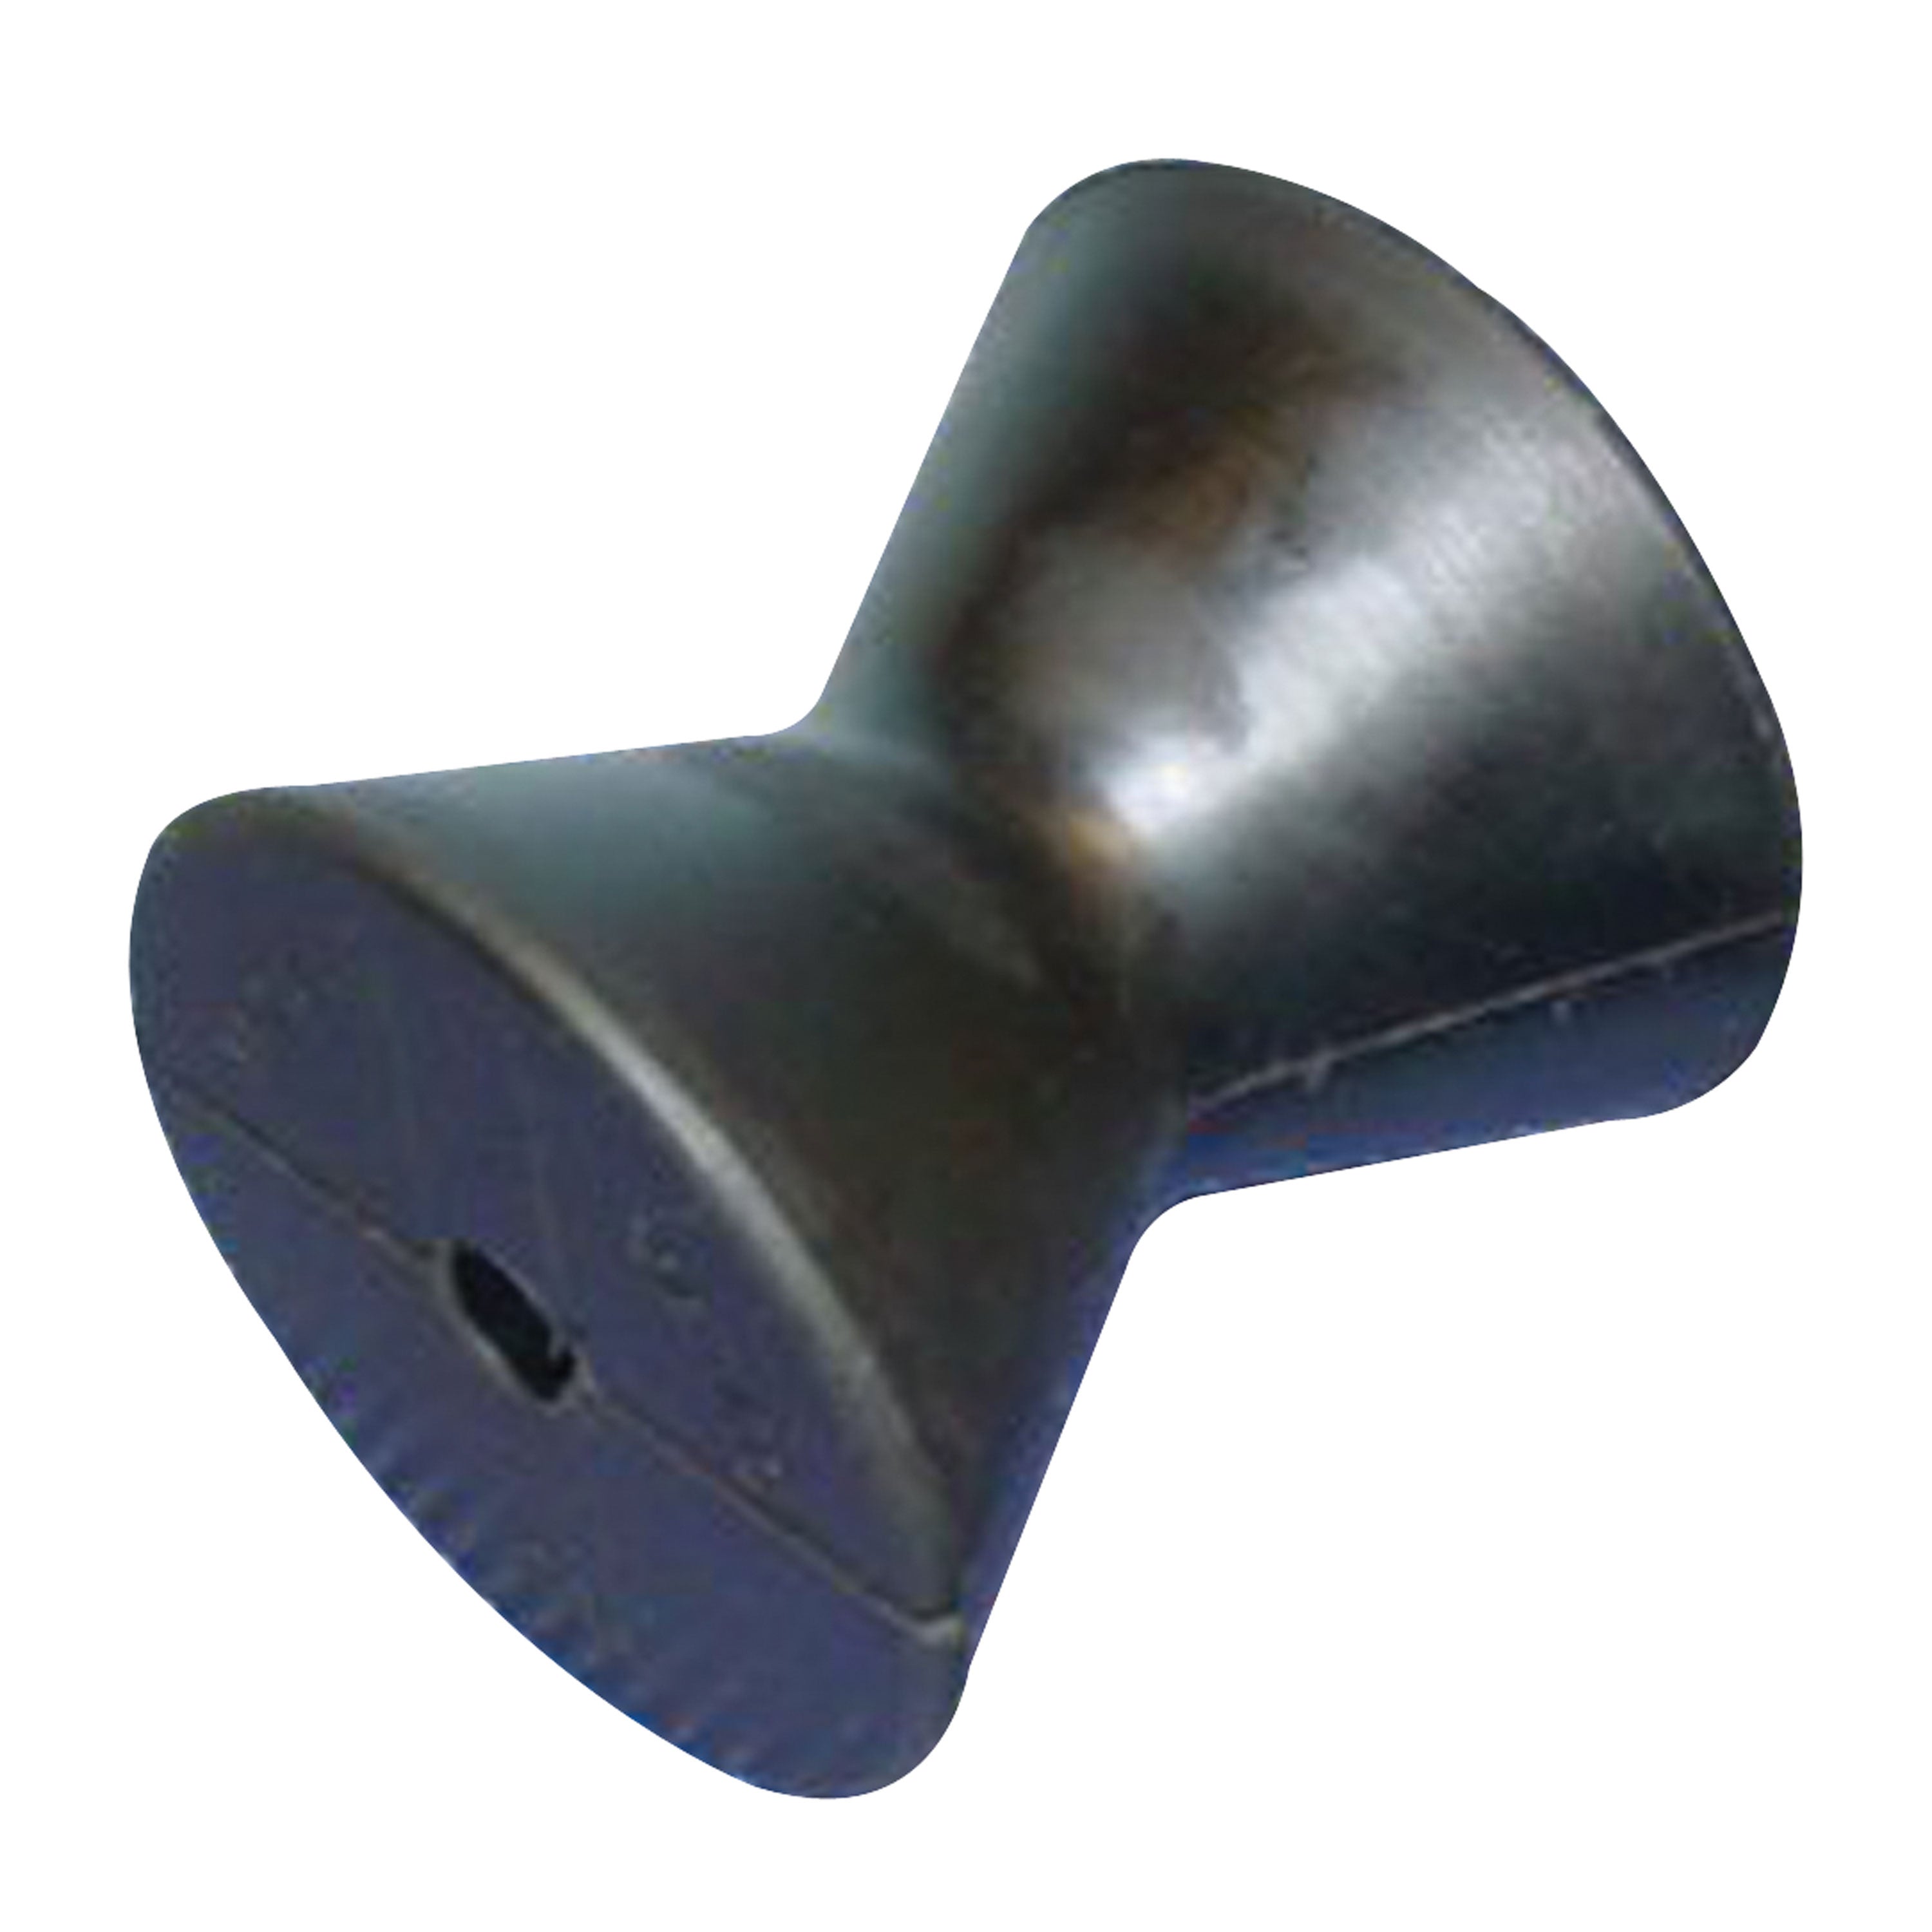 C.H. Yates 4174-4 Black Rubber Bow Roller - 4 in. x 0.5 in.